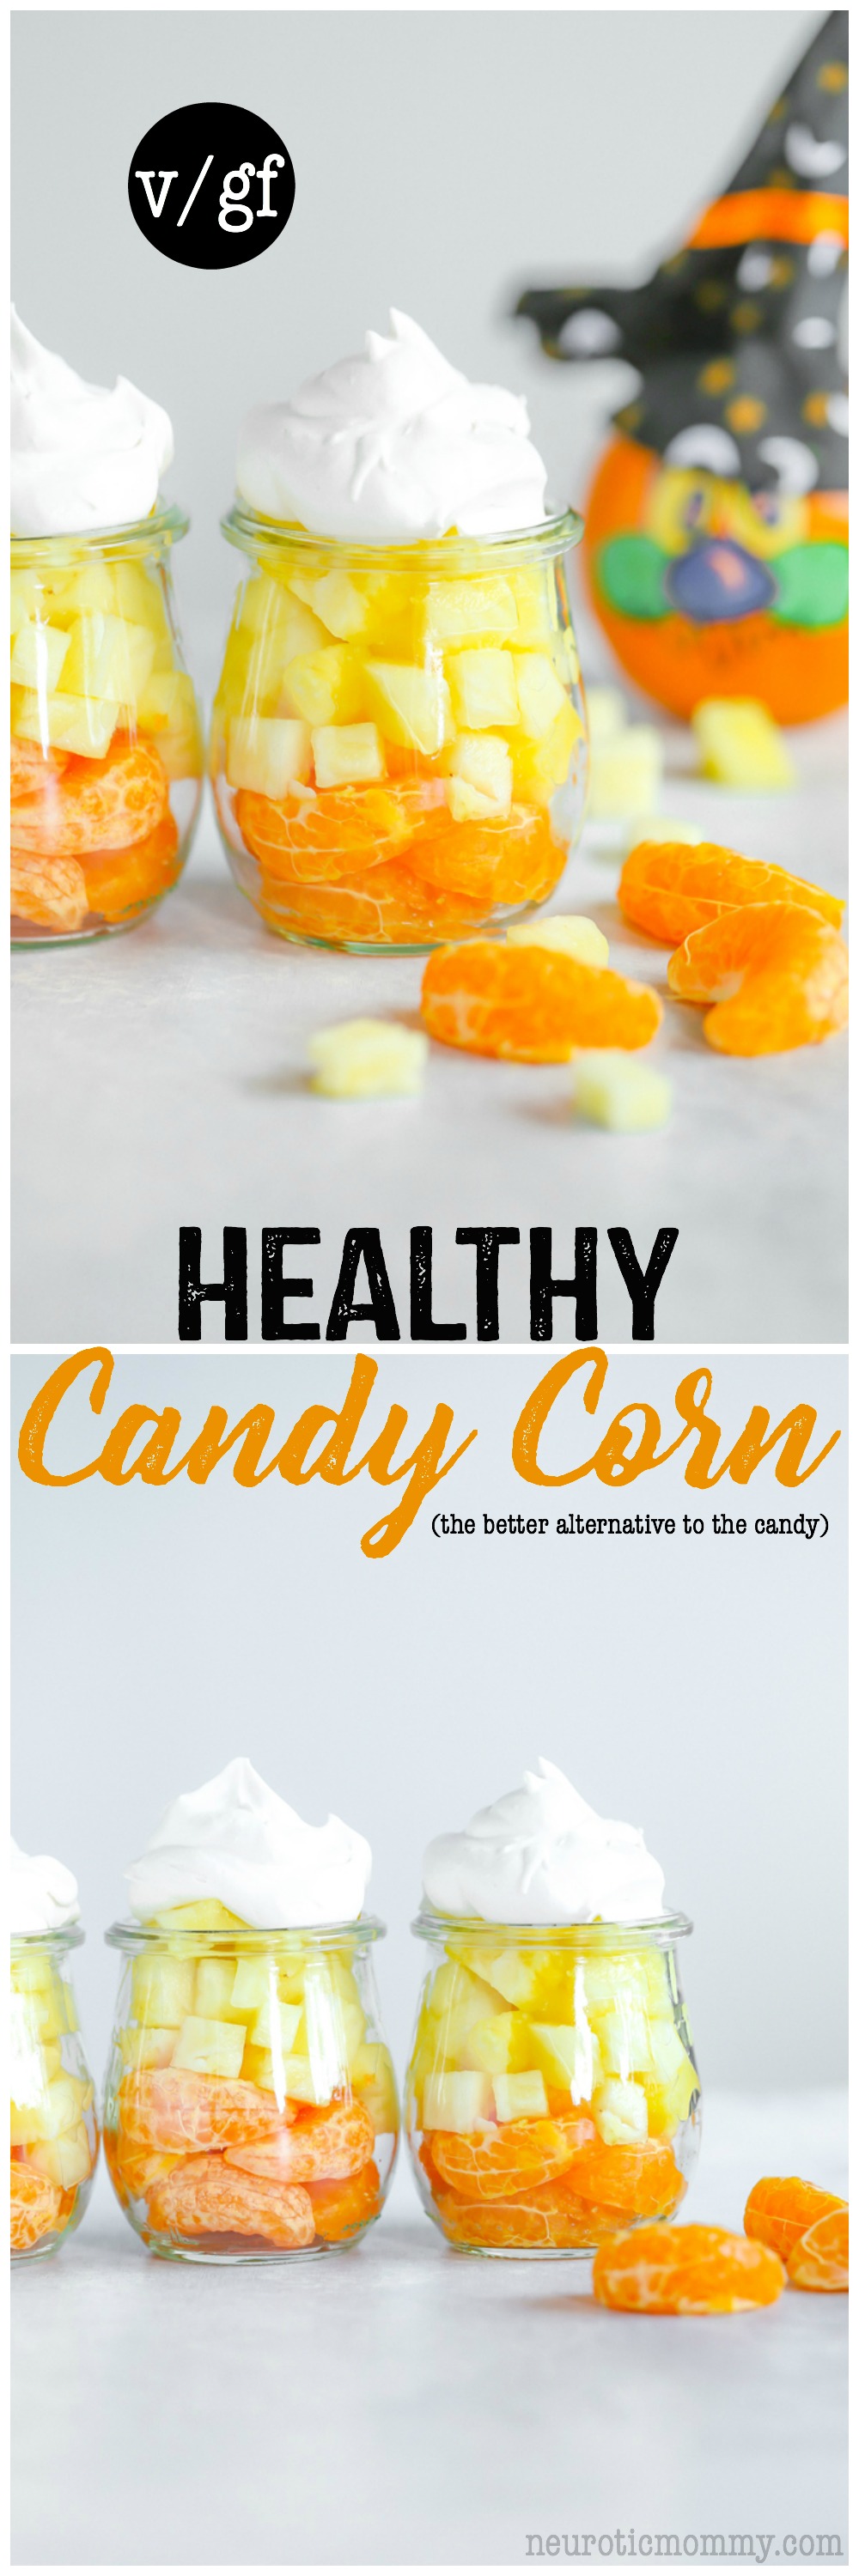 Healthy Candy Corn - A healthier, tastier option to the original. Fun and creative, something the kids will love to make and eat! NeuroticMommy.com #vegan #halloween #candycorn